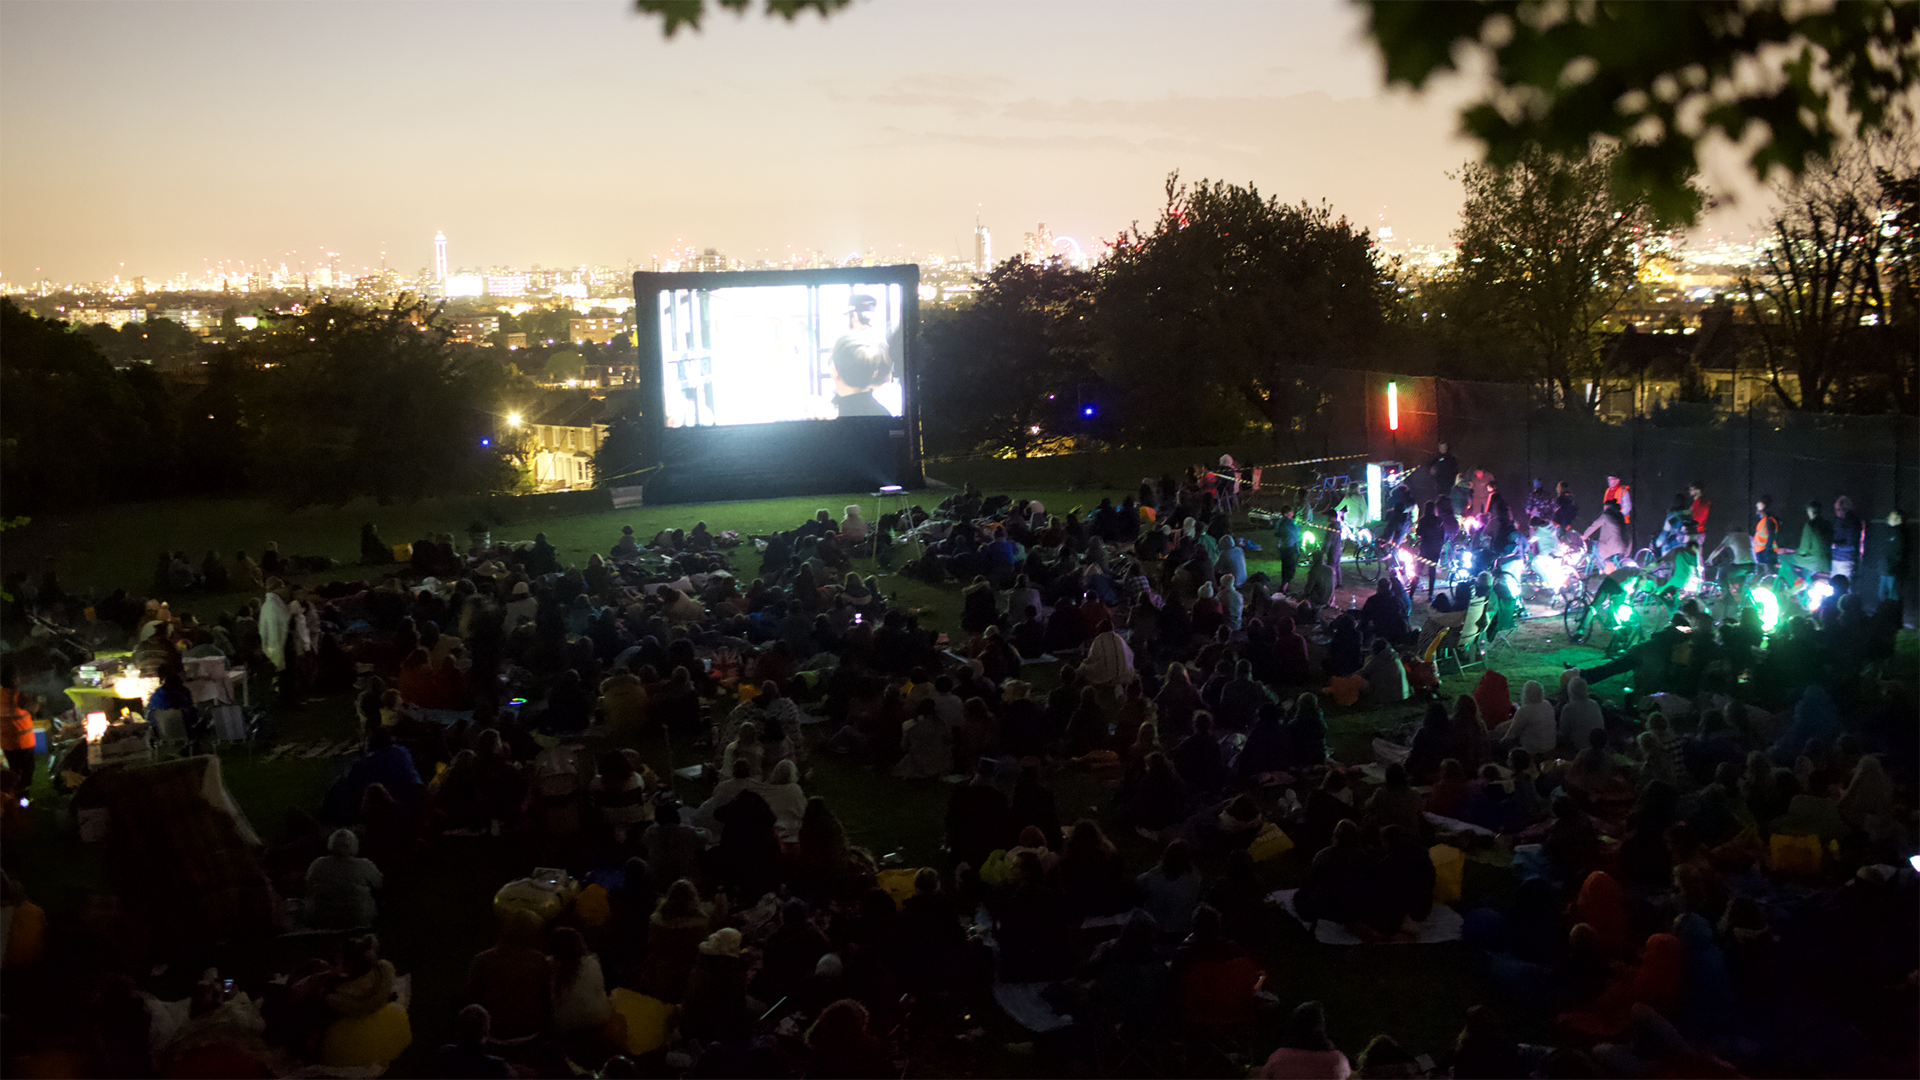 Arial shot of people at an outdoor cinema